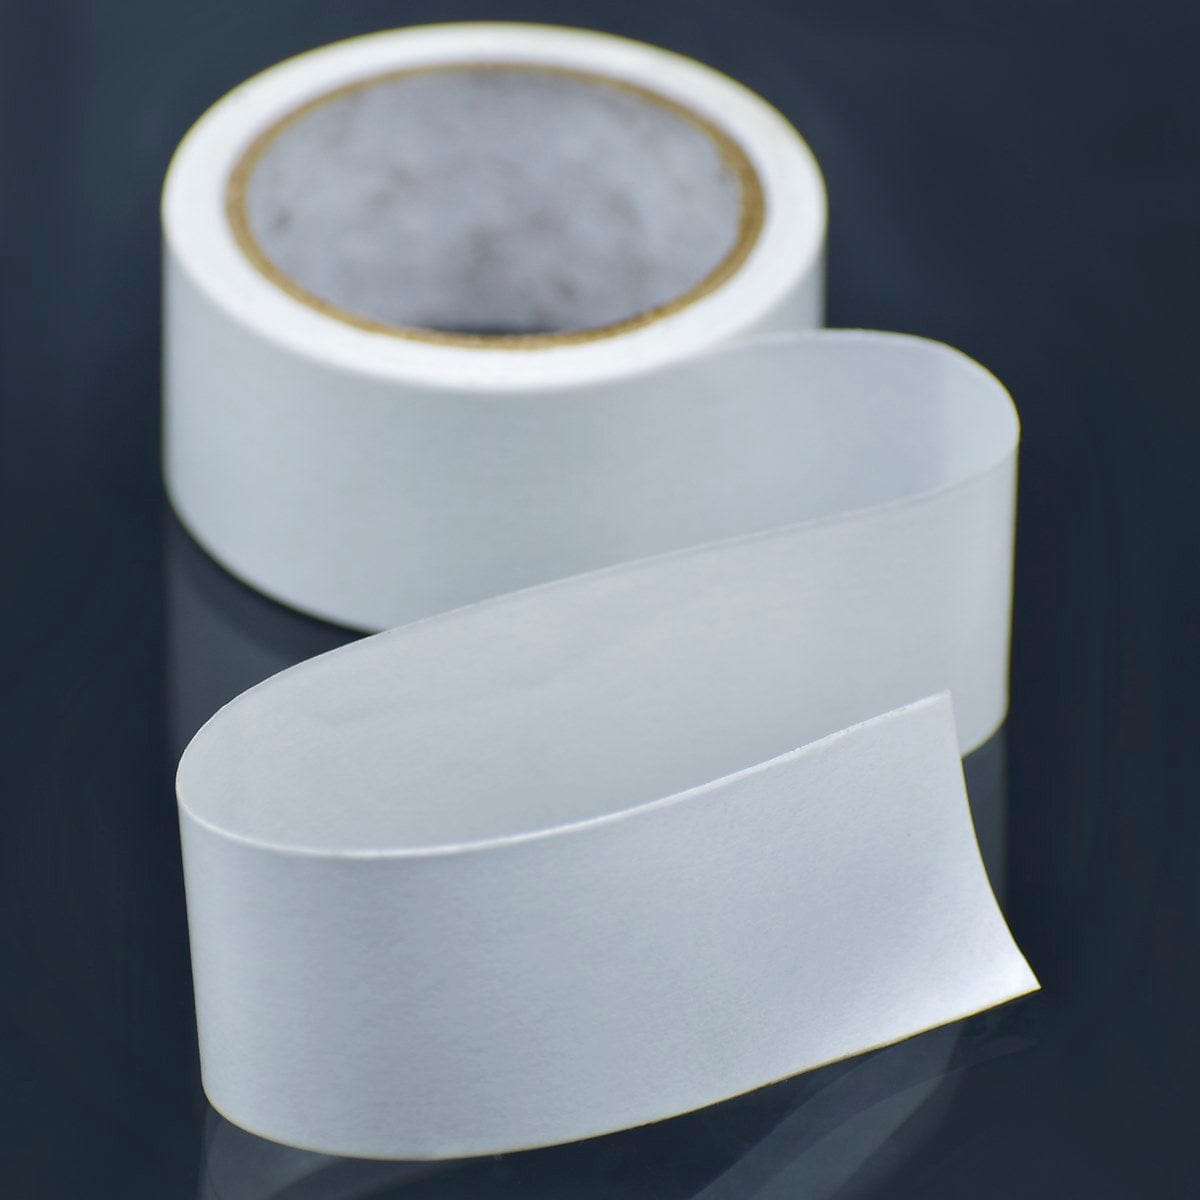 jags-mumbai Two way tape Double Sided Tissue Tape 5 M long 24MM wide